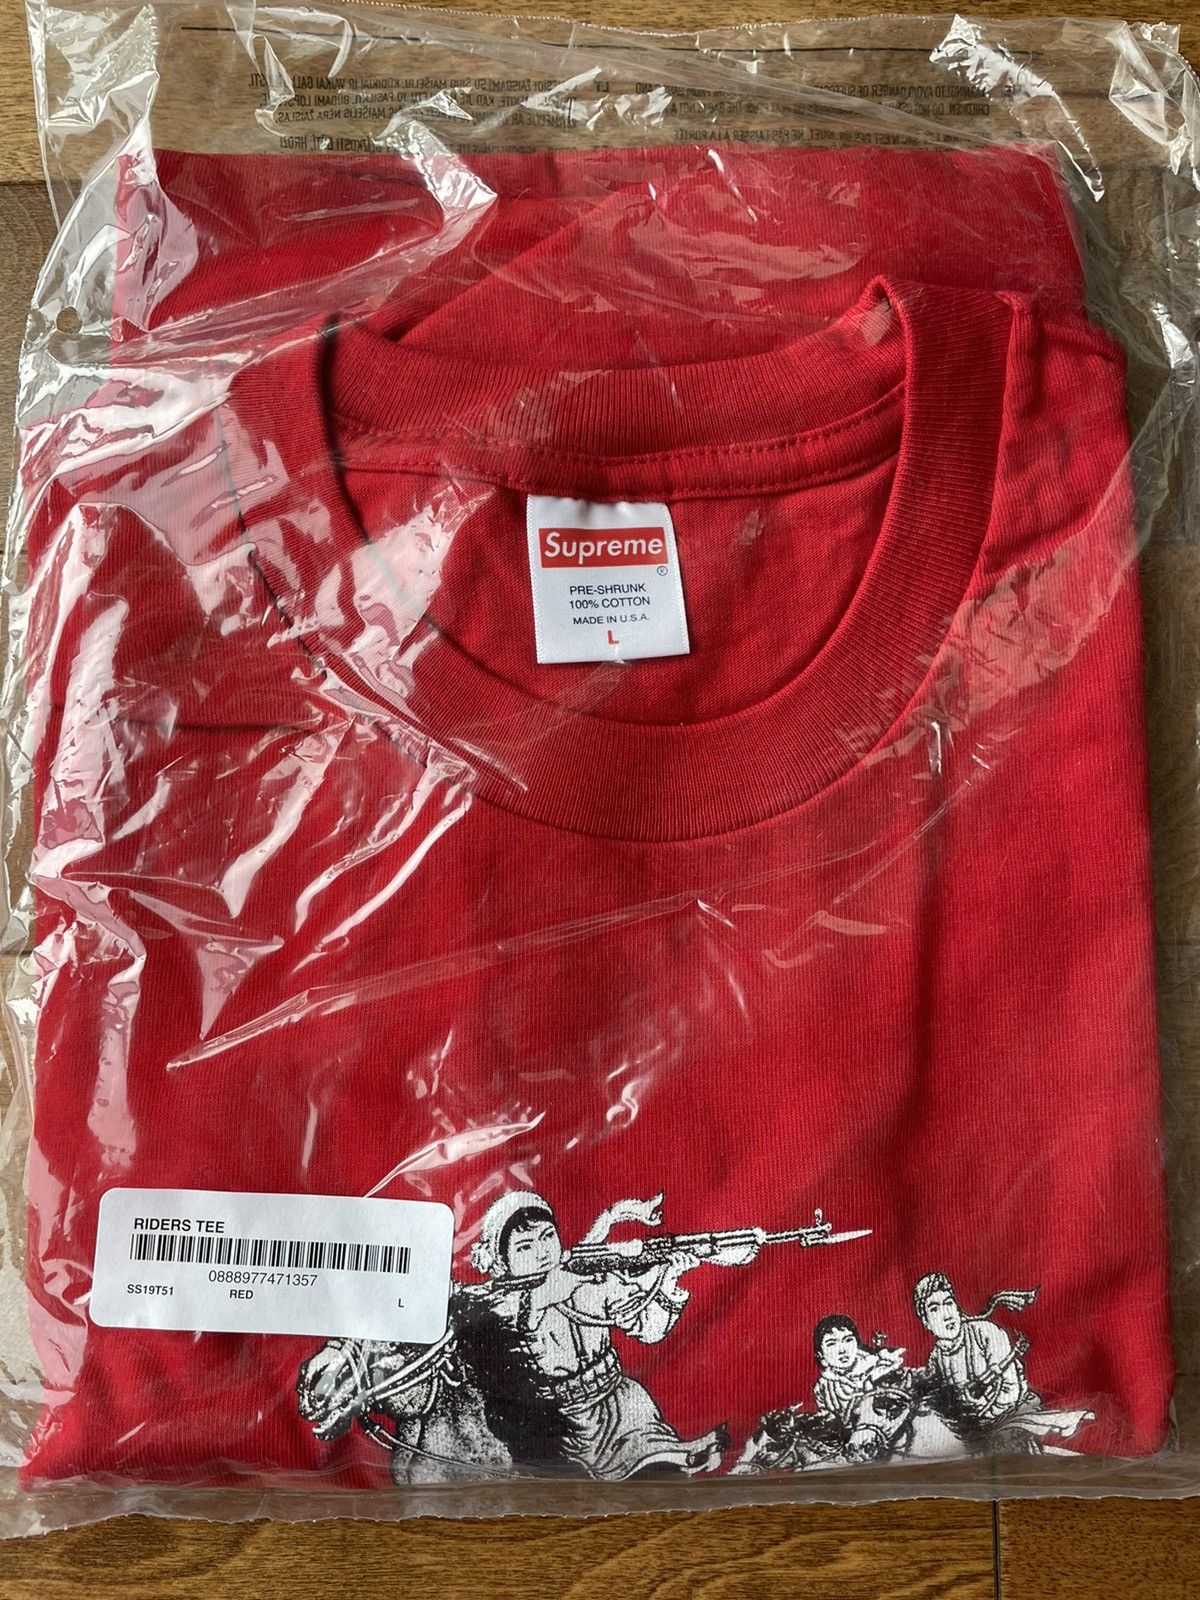 Supreme Supreme Riders Tee Red Large | Grailed